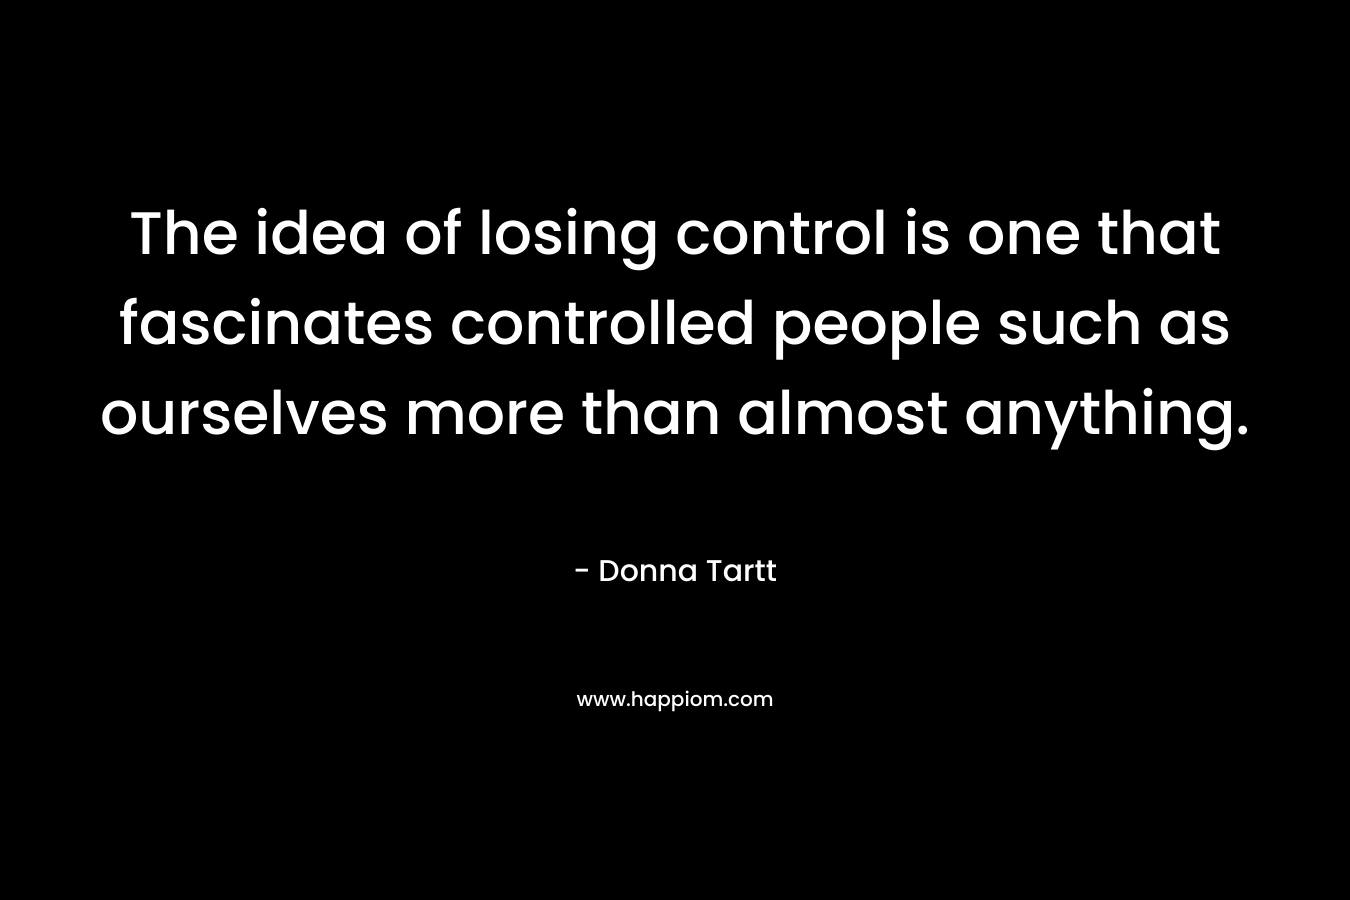 The idea of losing control is one that fascinates controlled people such as ourselves more than almost anything.